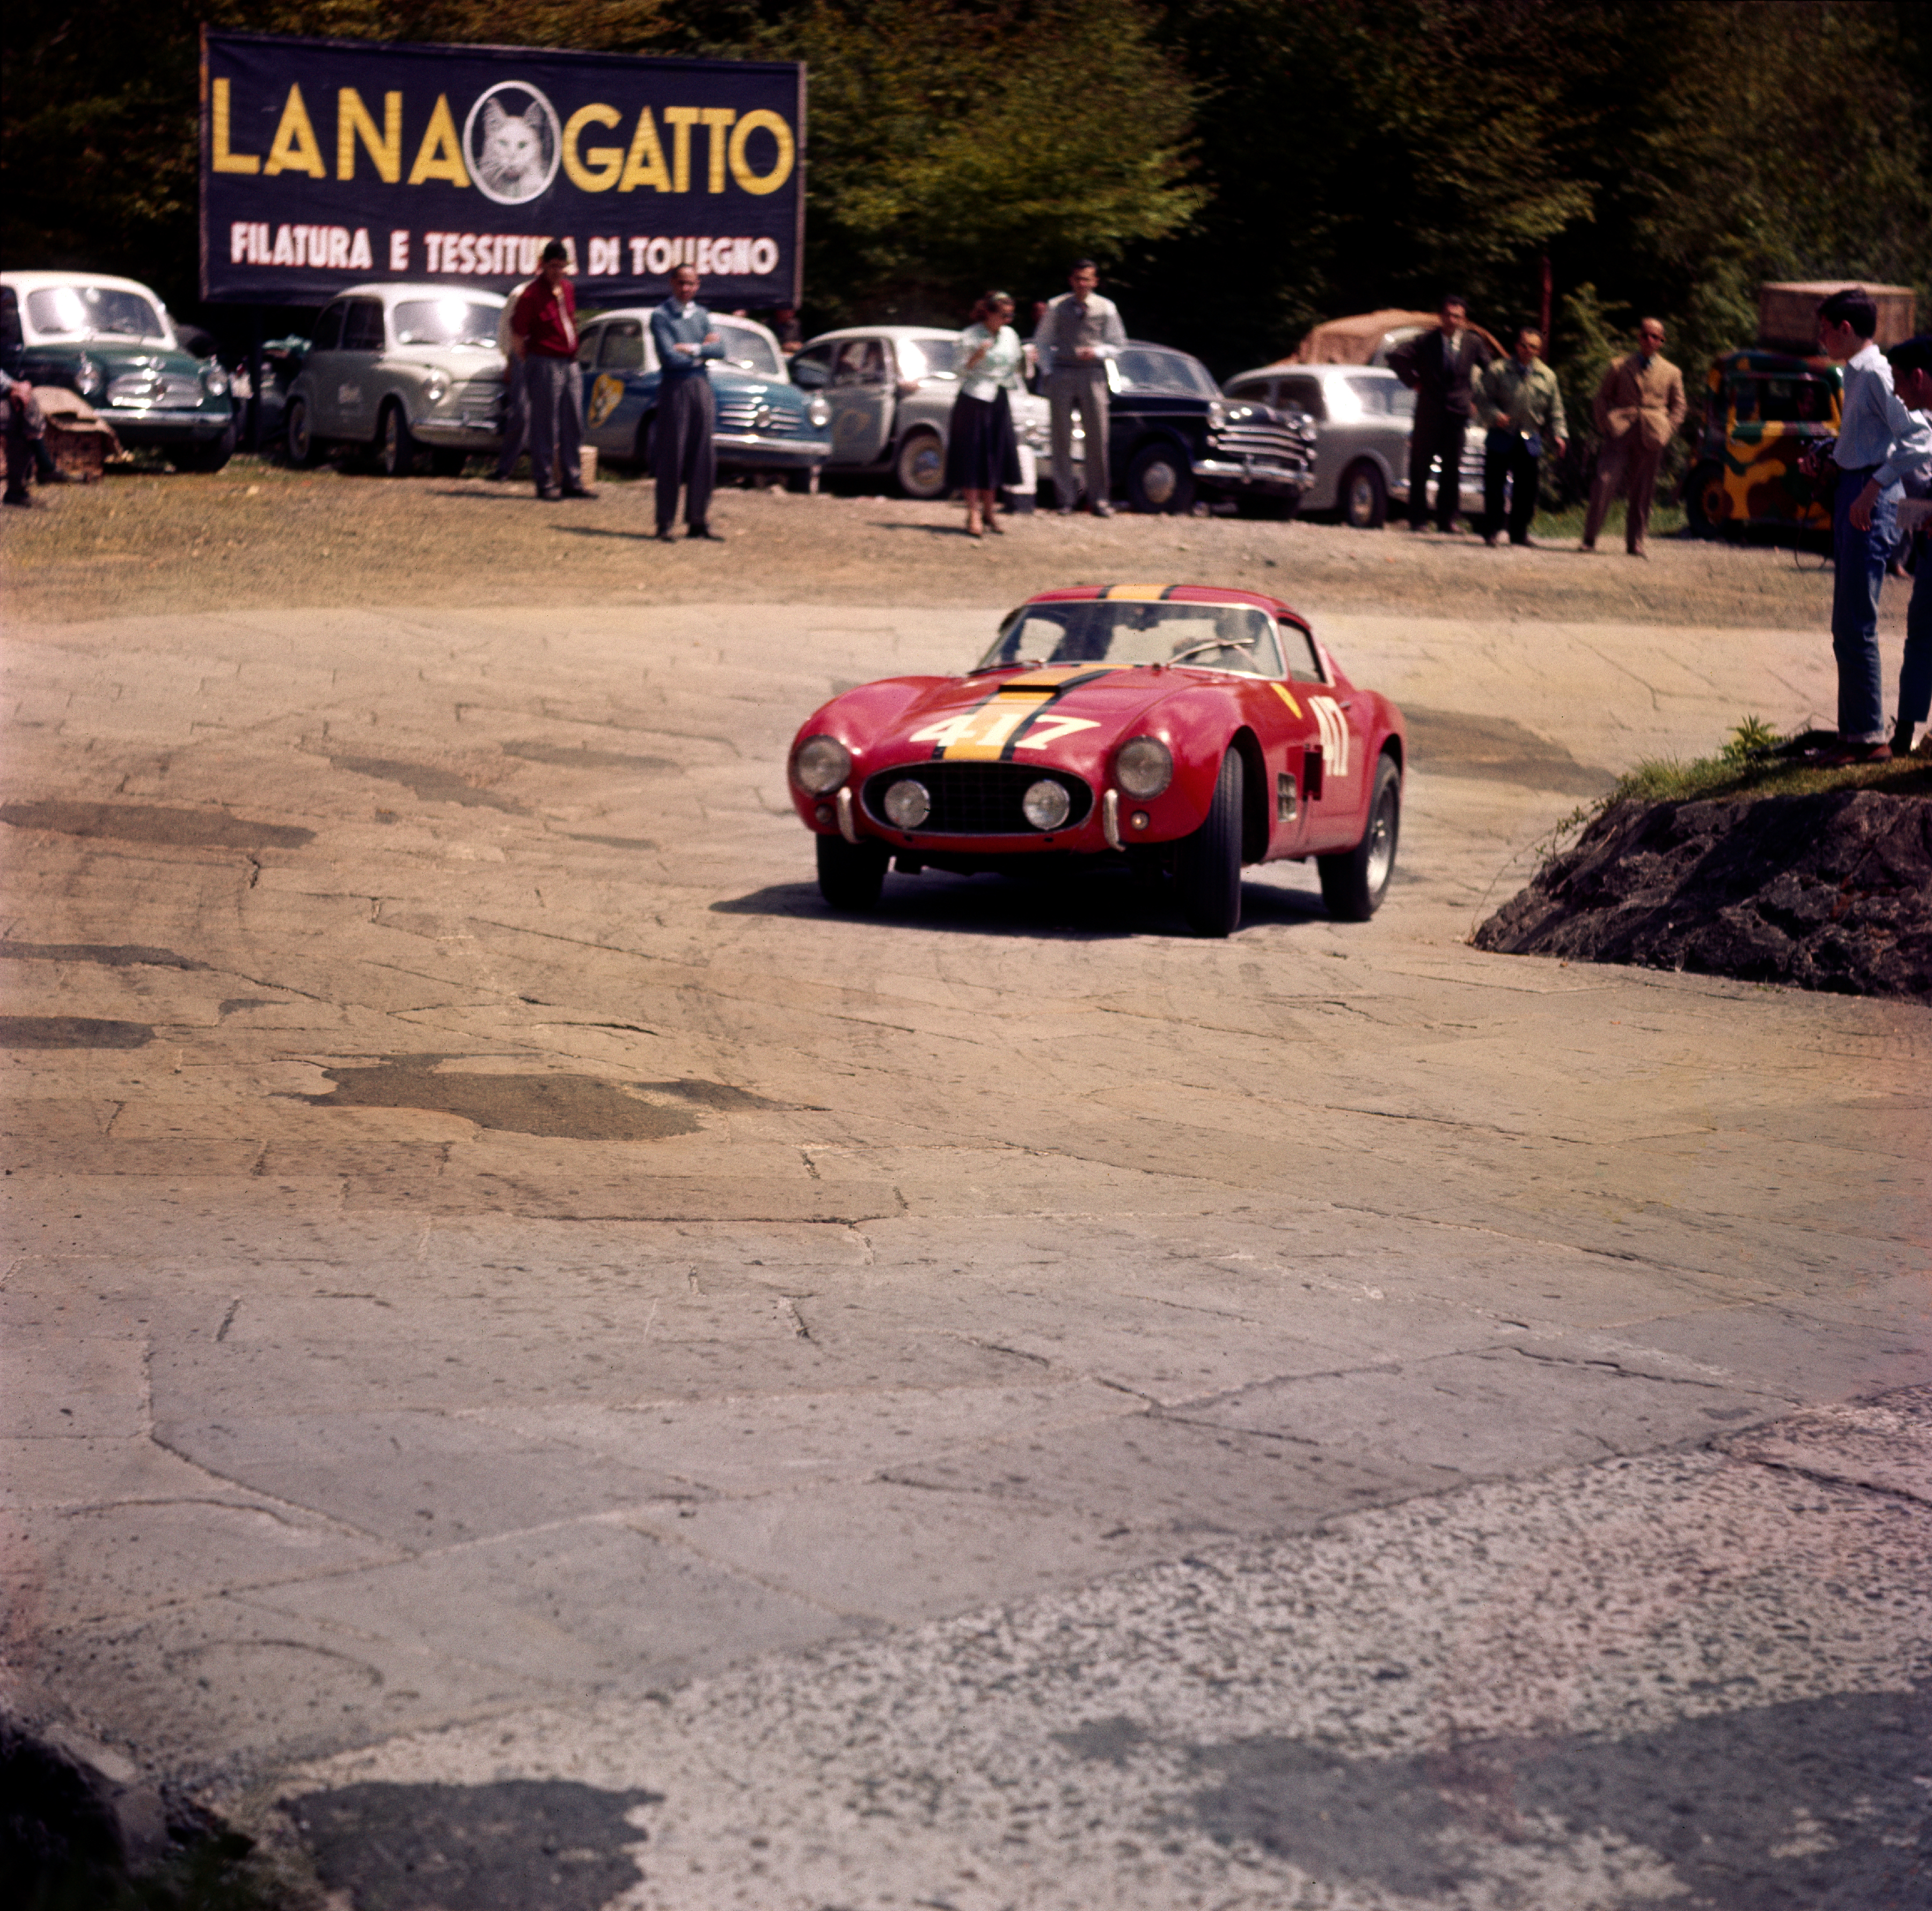 Olivier Gendebien and his cousin Jacques Washer in their Ferrari 250GT Tour de France